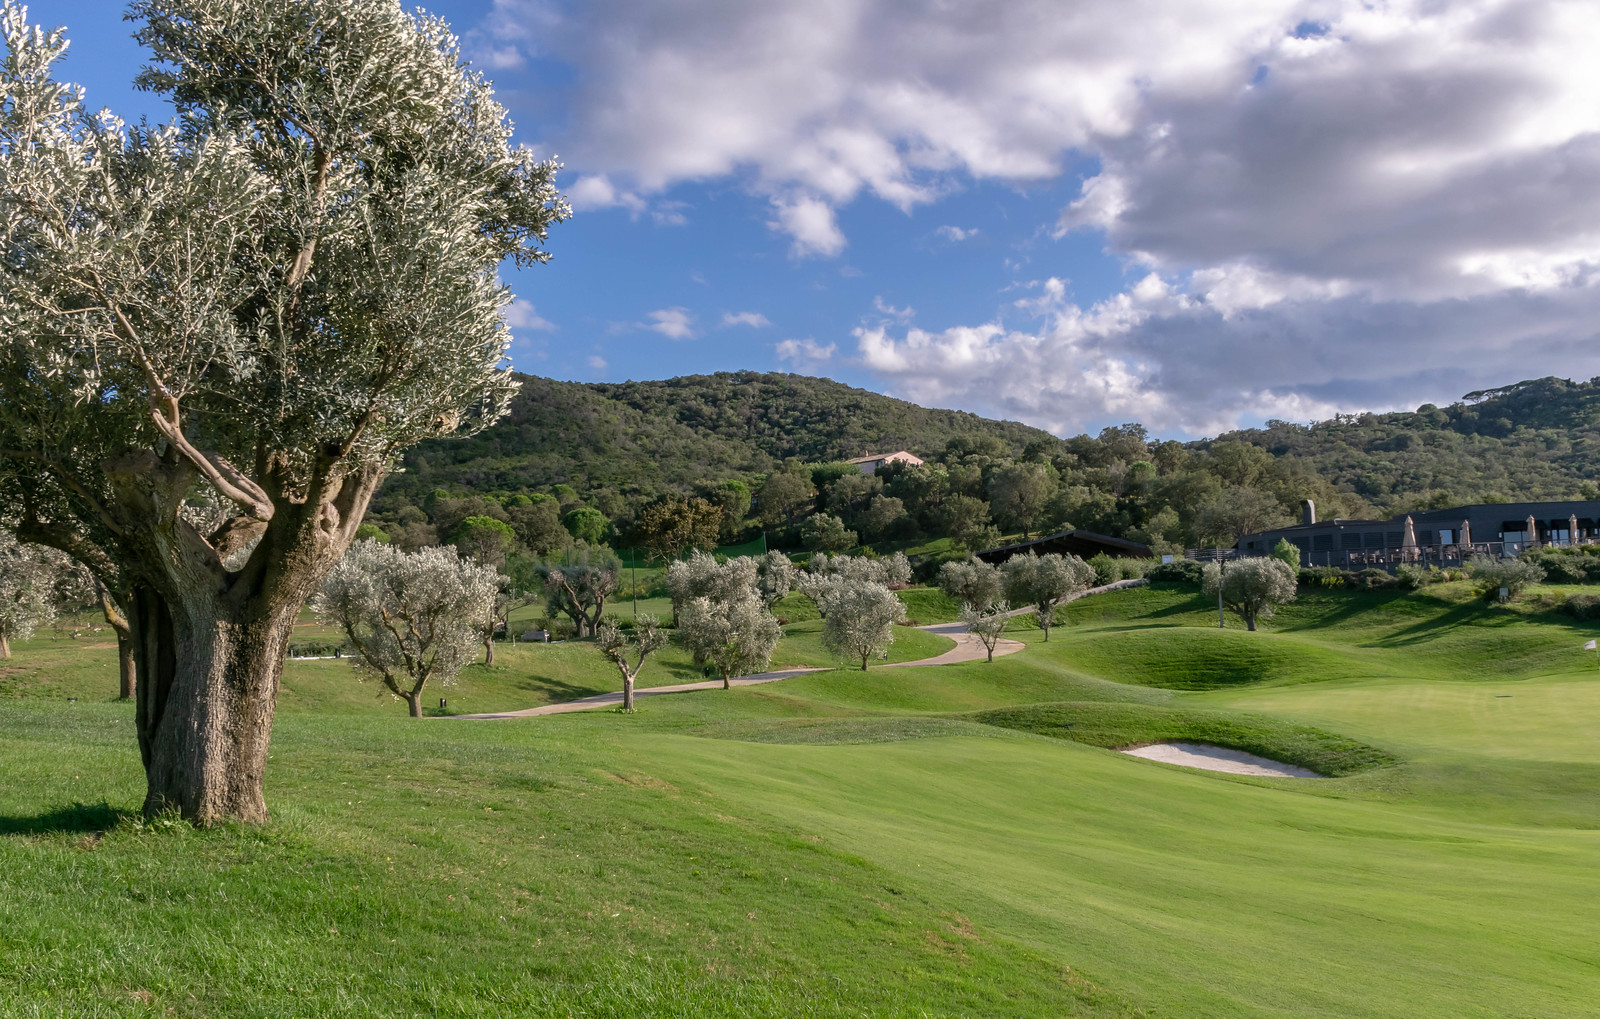 Golf course with olive trees in Tuscany off the beaten path, Monte Argentario, Italy